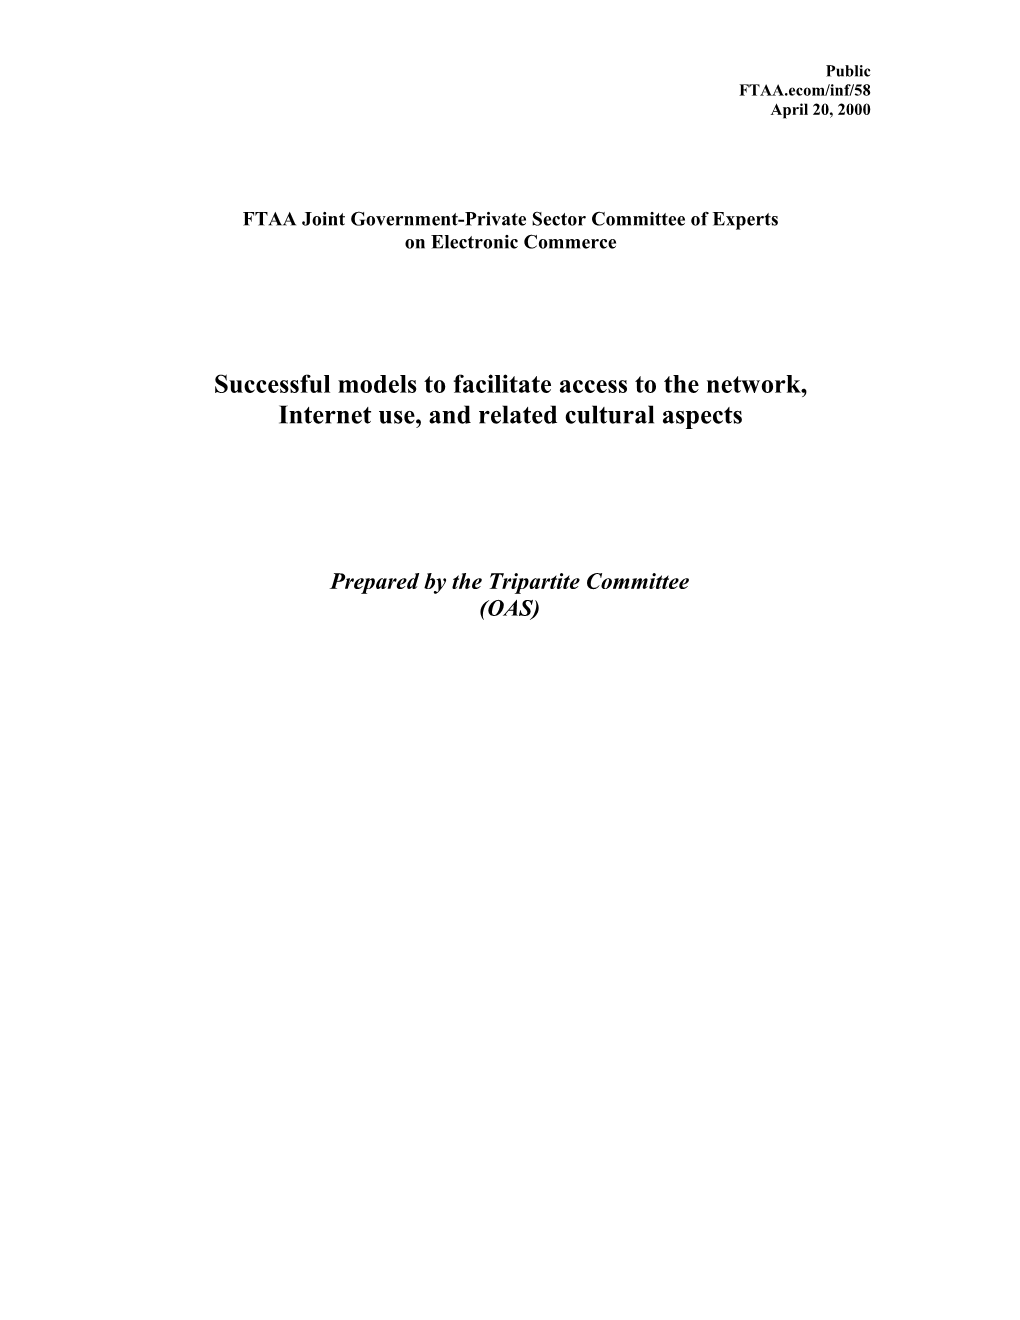 FTAA.Ecom/Inf/58 April 20, 2000 Successful Models to Facilitate Access to the Network,Internet